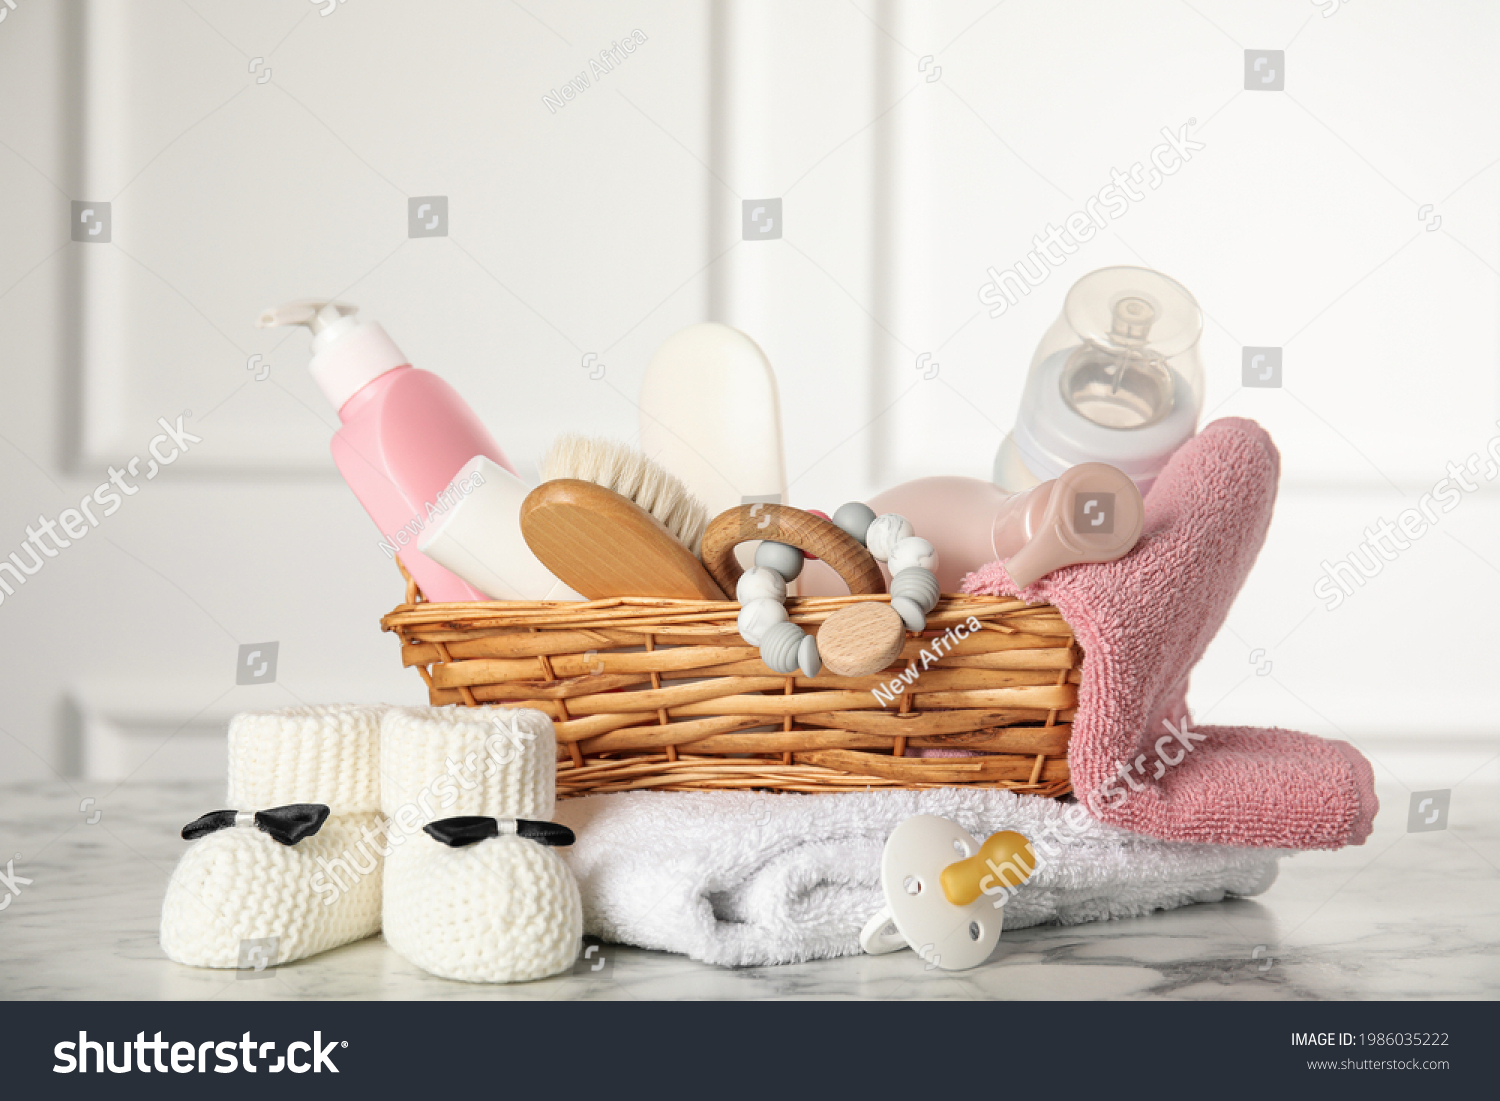 Baby booties and accessories on white marble table indoors #1986035222